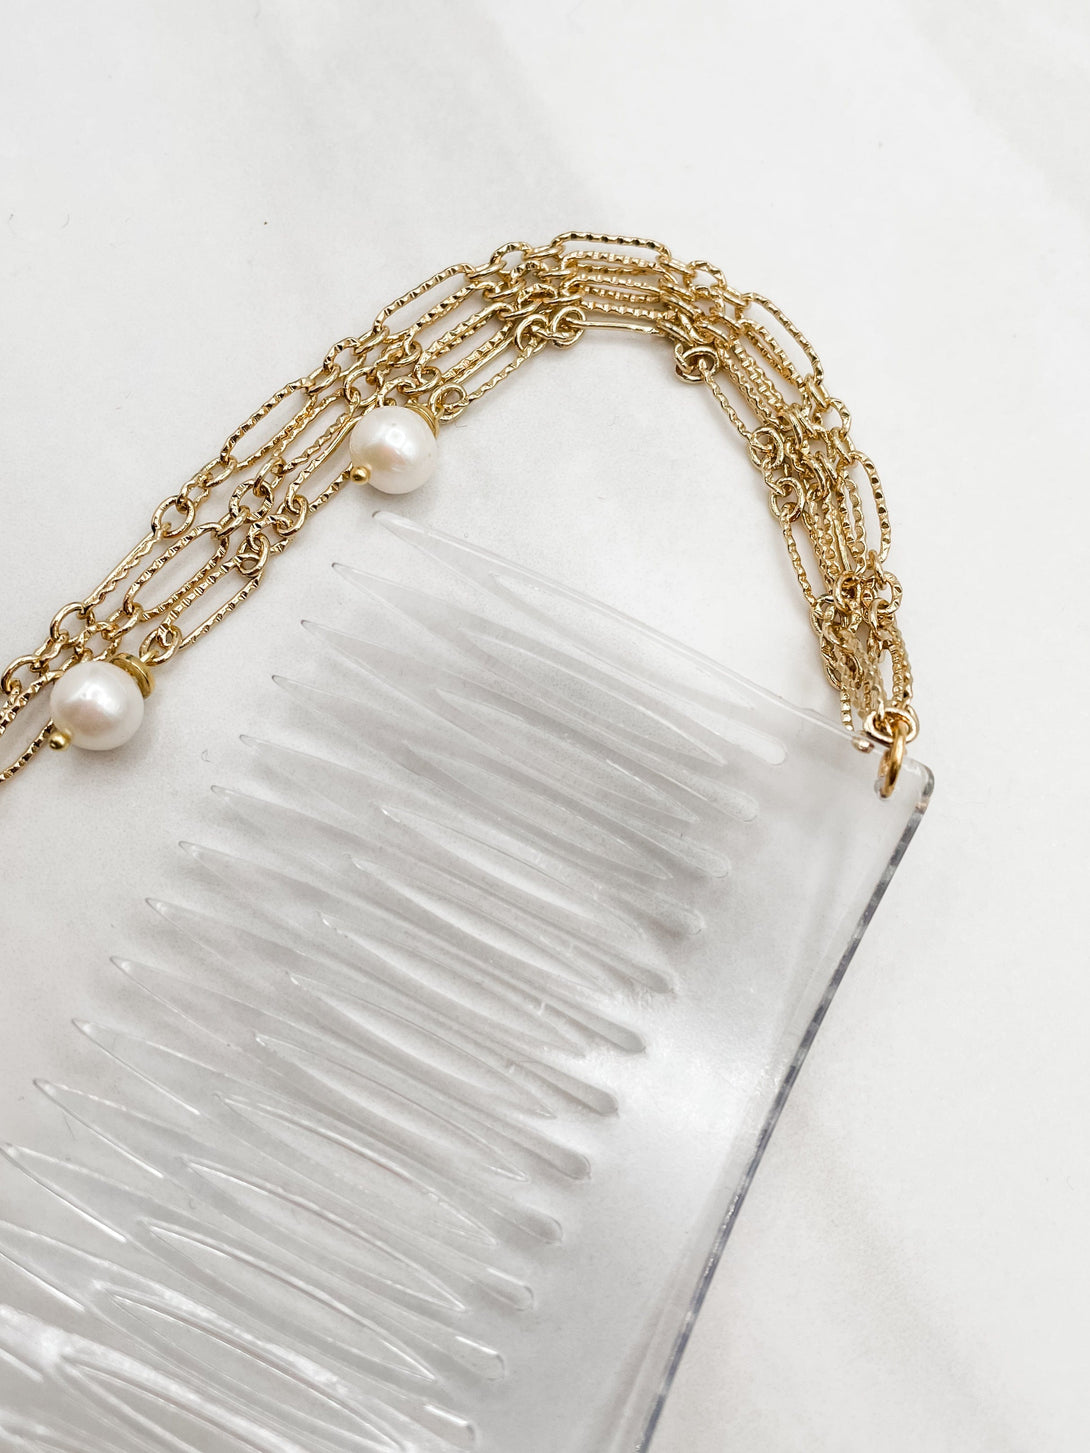 Sylvie Gabrielli French Vintage It's Gonna Be May Hair Comb, Women's Hair Ornament with Freshwater Pearls